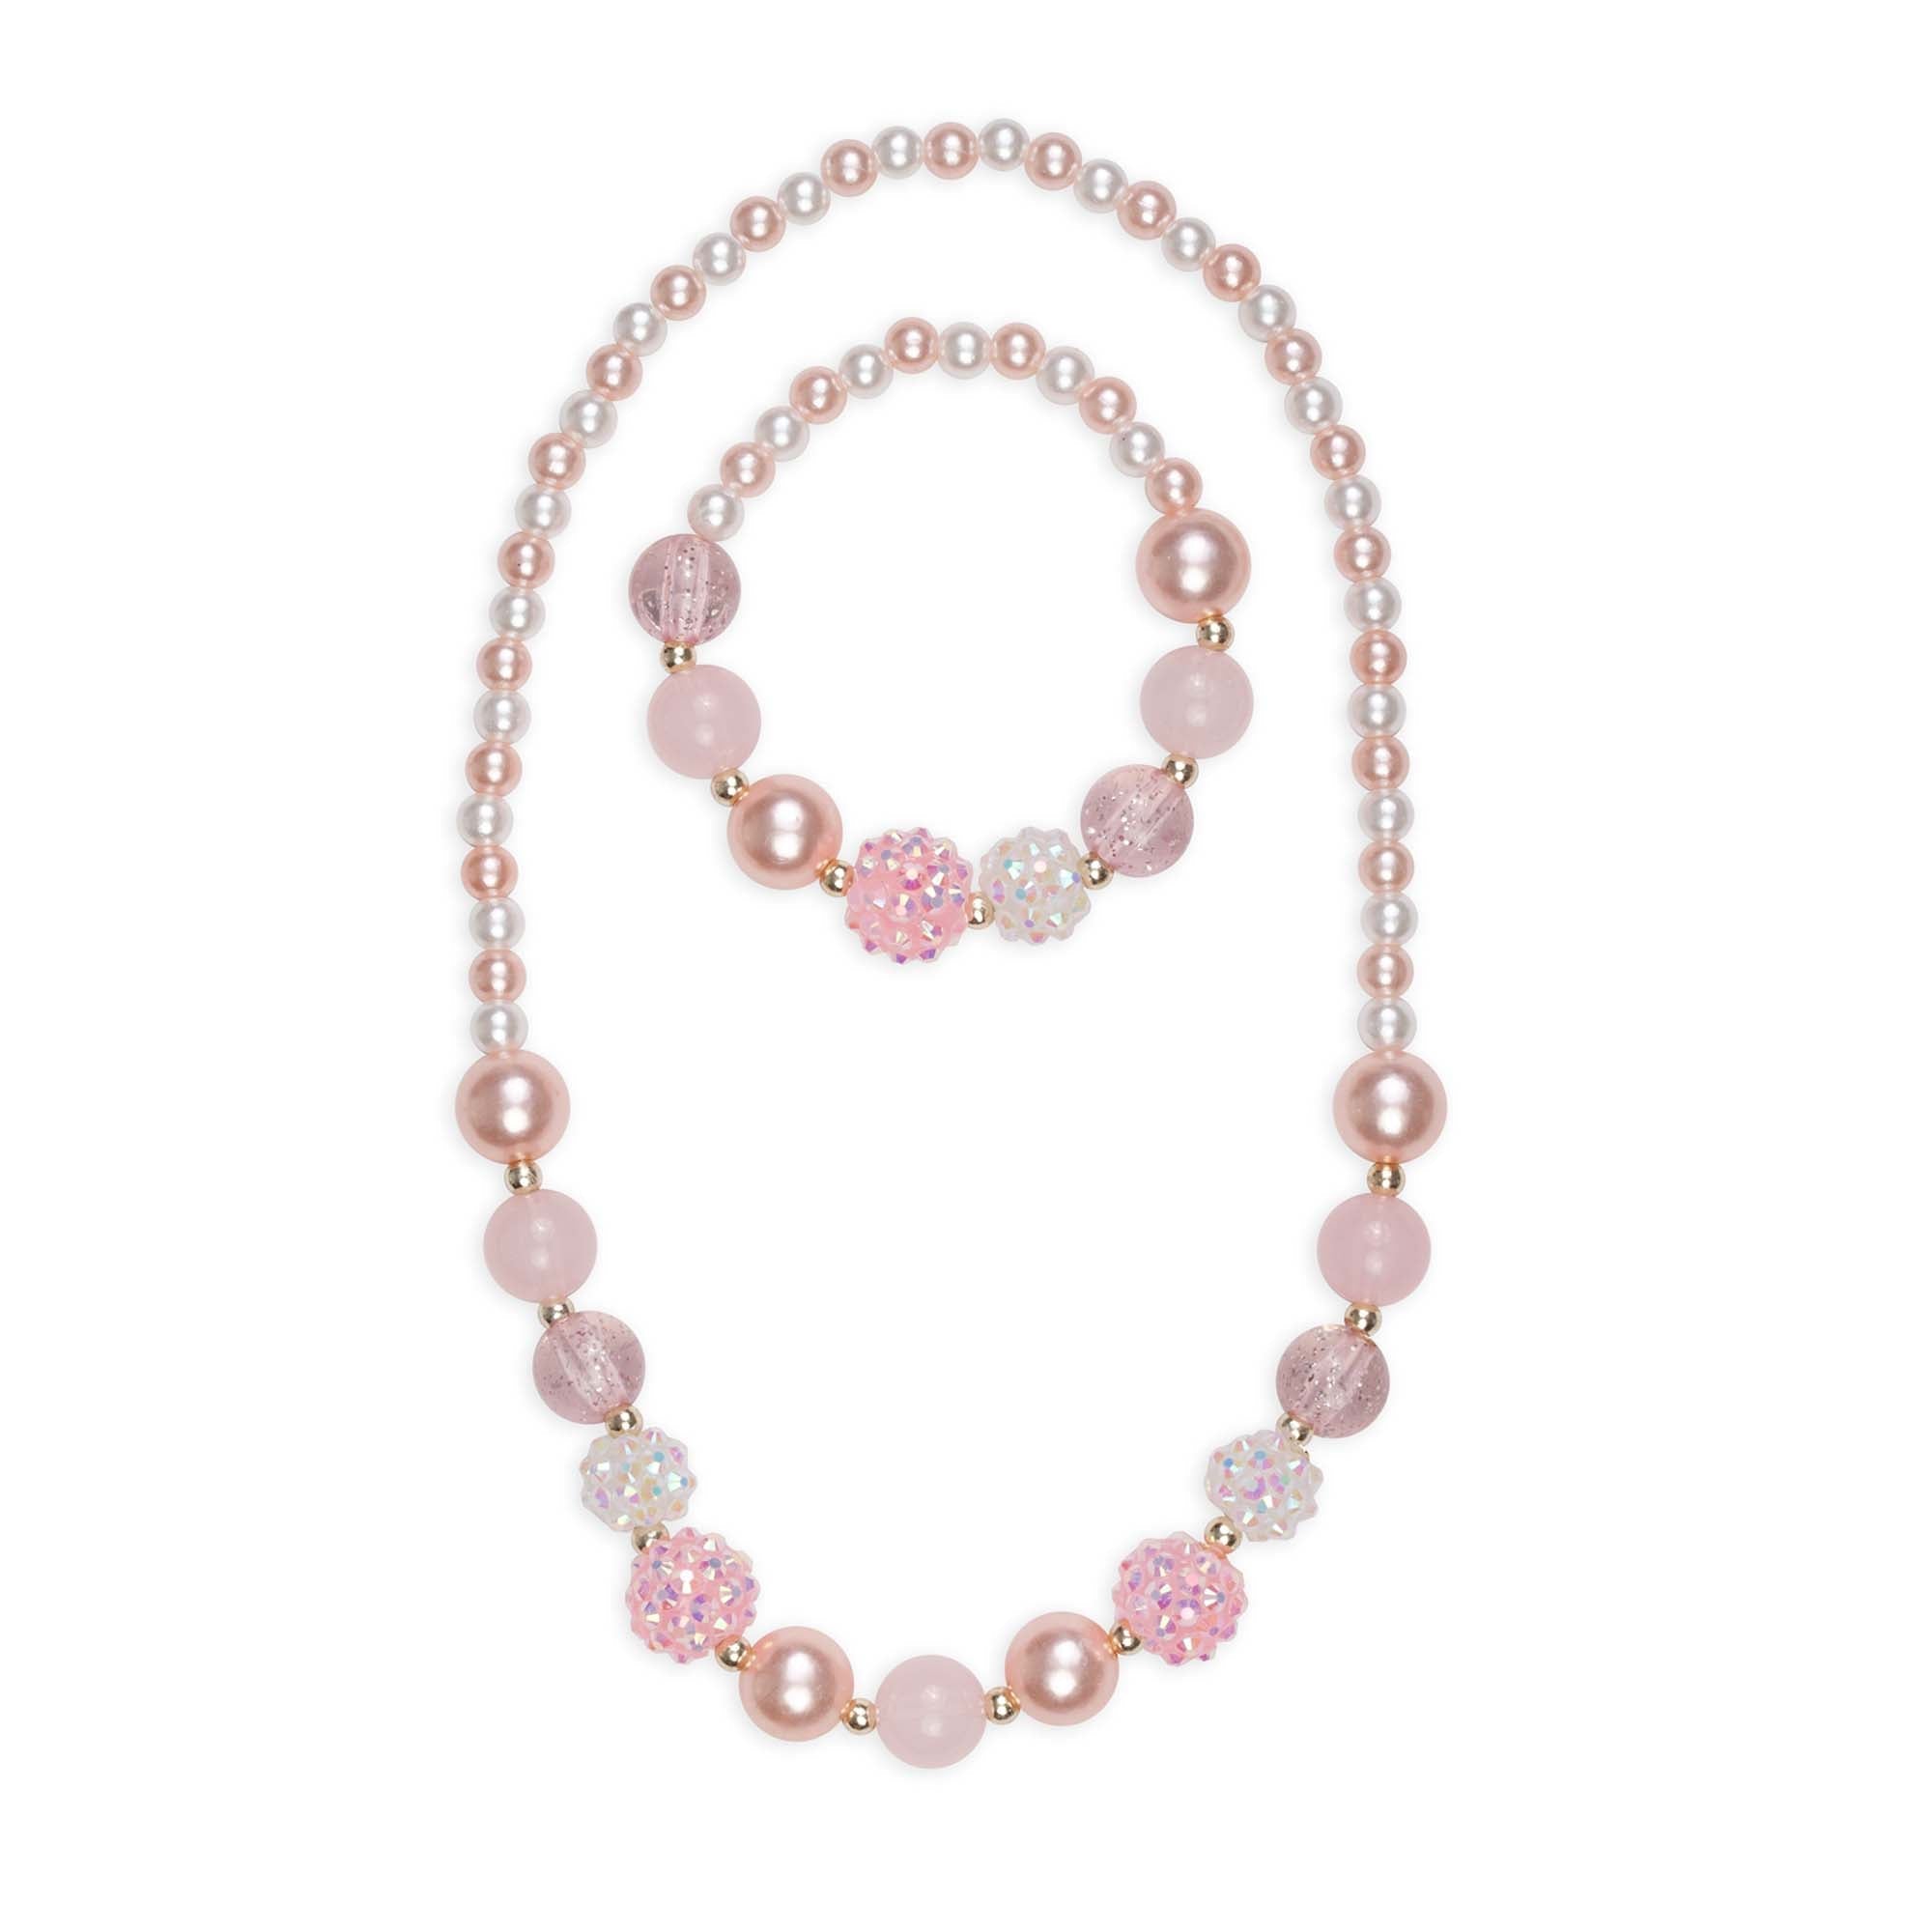 Pinky Pearl Necklace and Bracelet Set for Kids